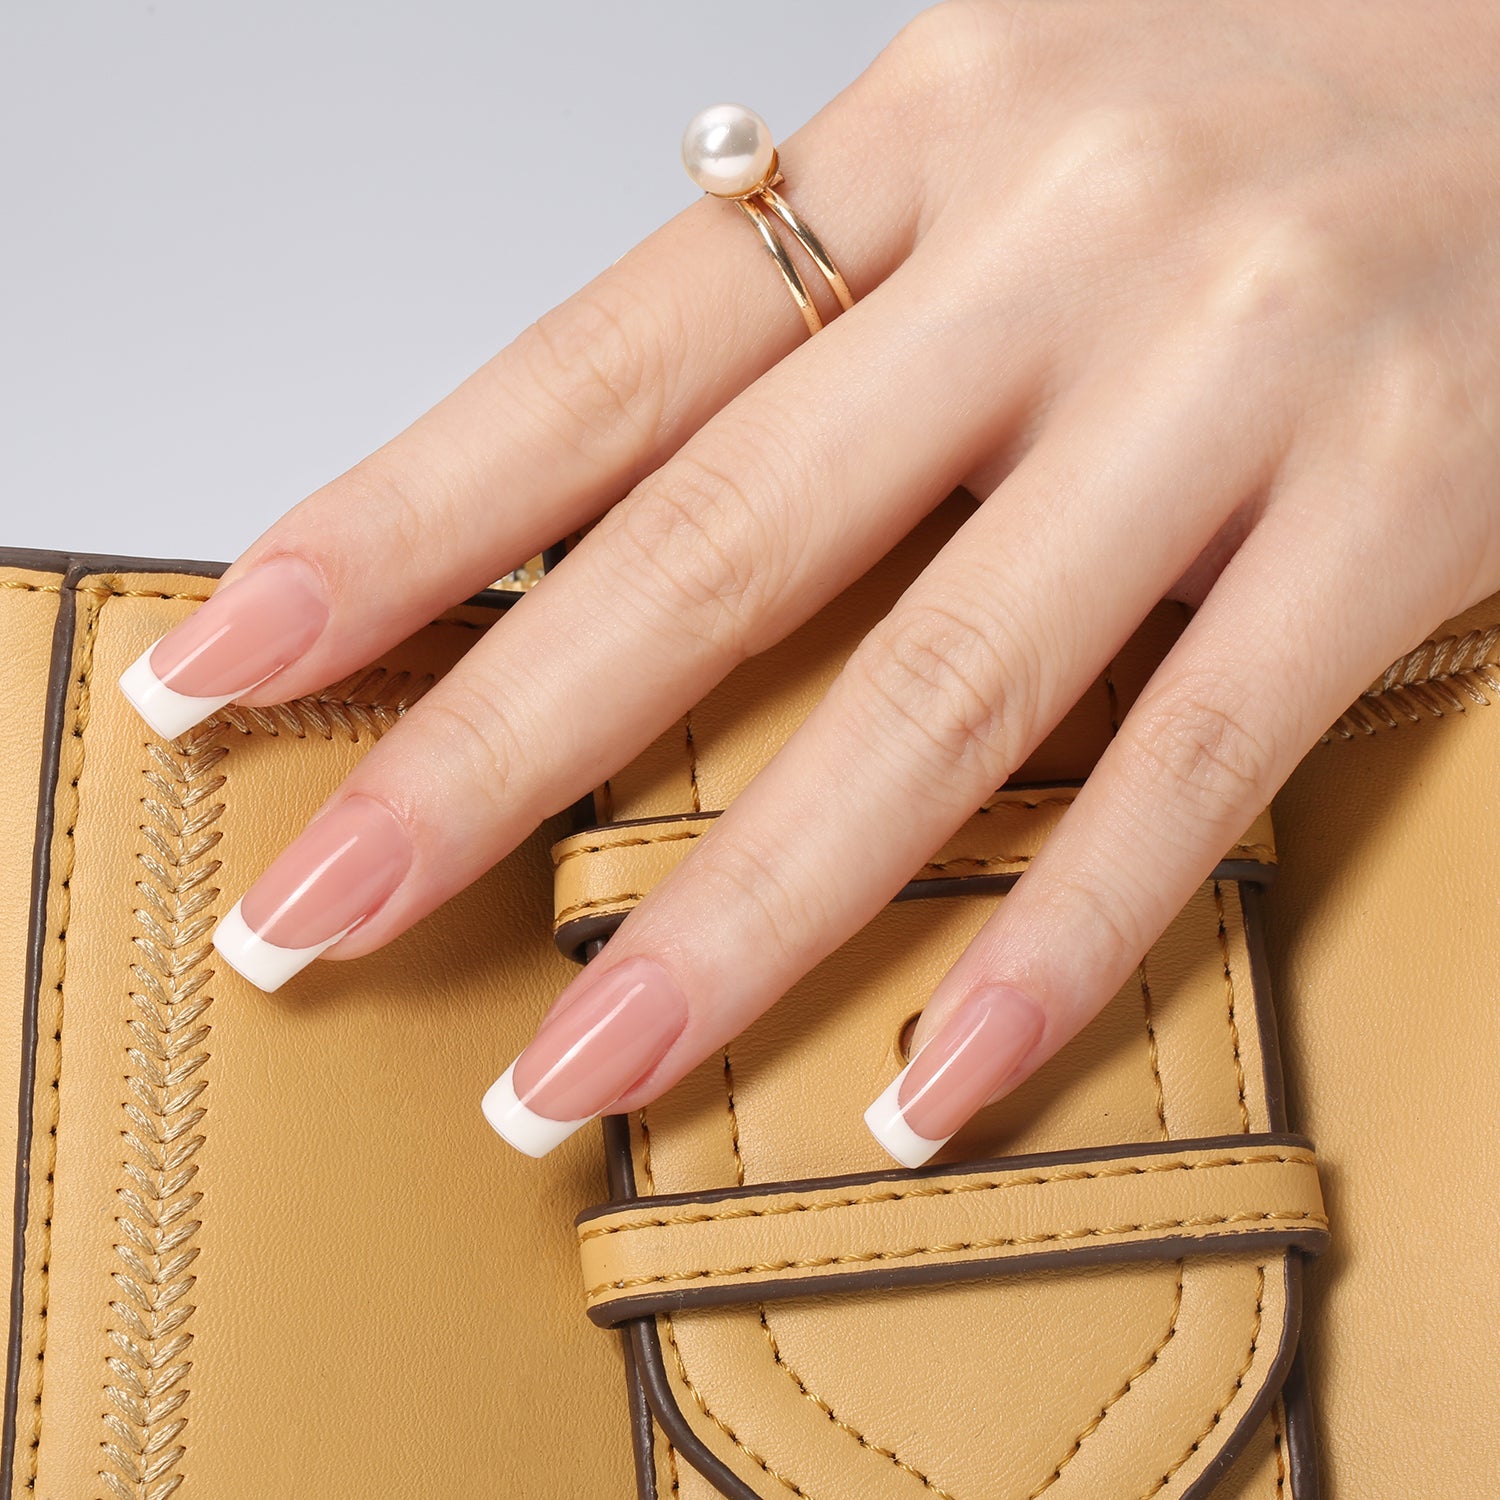 Classic French Manicure